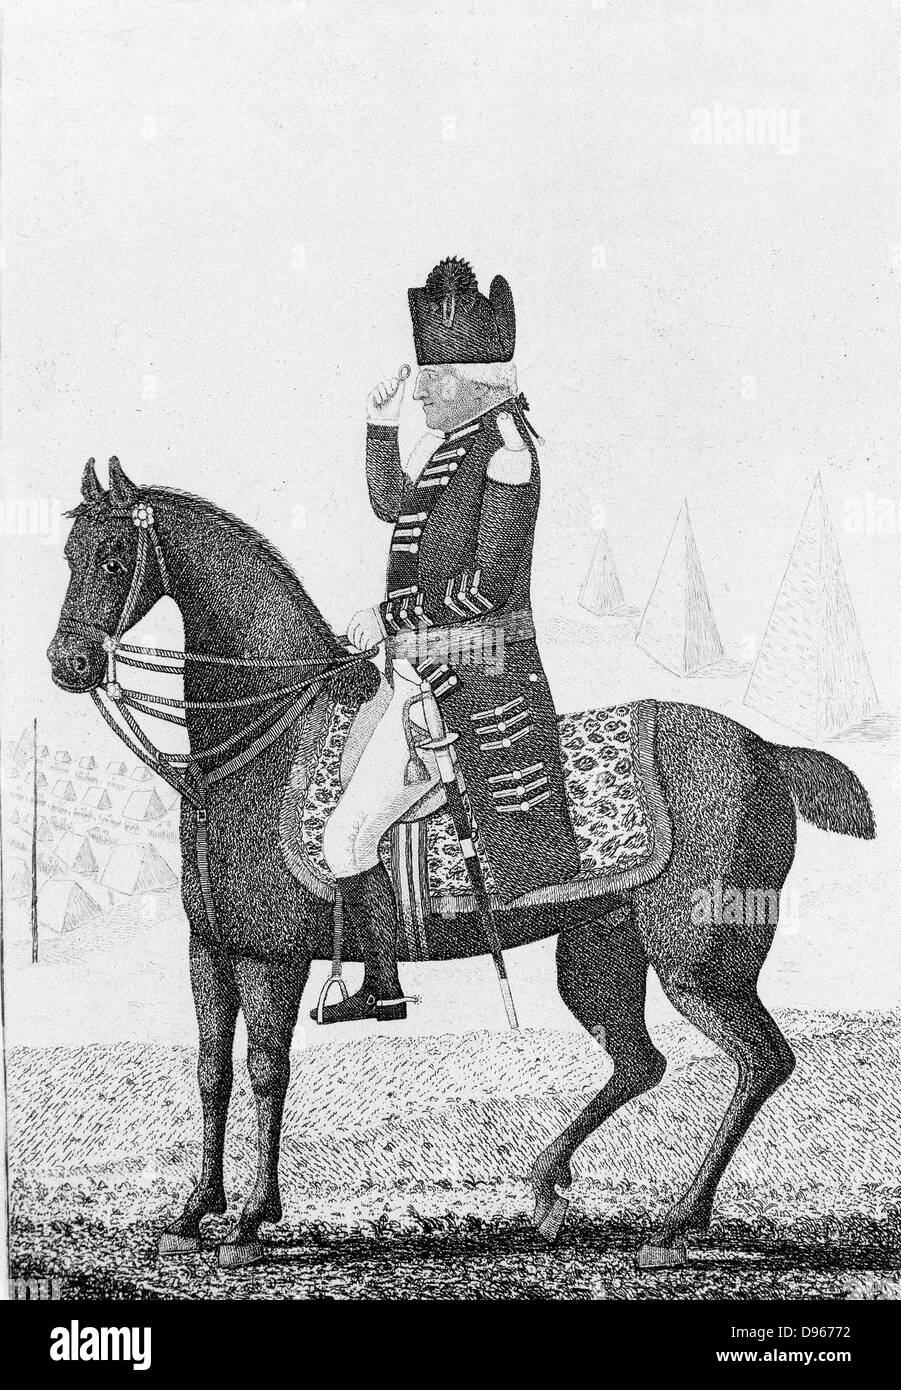 Ralph Abercromby (1734-1801) Scottish general. Served in Seven Years'  War.  Defeated French at Alexandria (Aboukir), 21 March 1801, but died of his wounds. John Kay cartoon of 1801 showing Abercromby mounted and using a spyglass (telescope). In right background are 3 pyramids and on left an army under canvas. Etching. Stock Photo